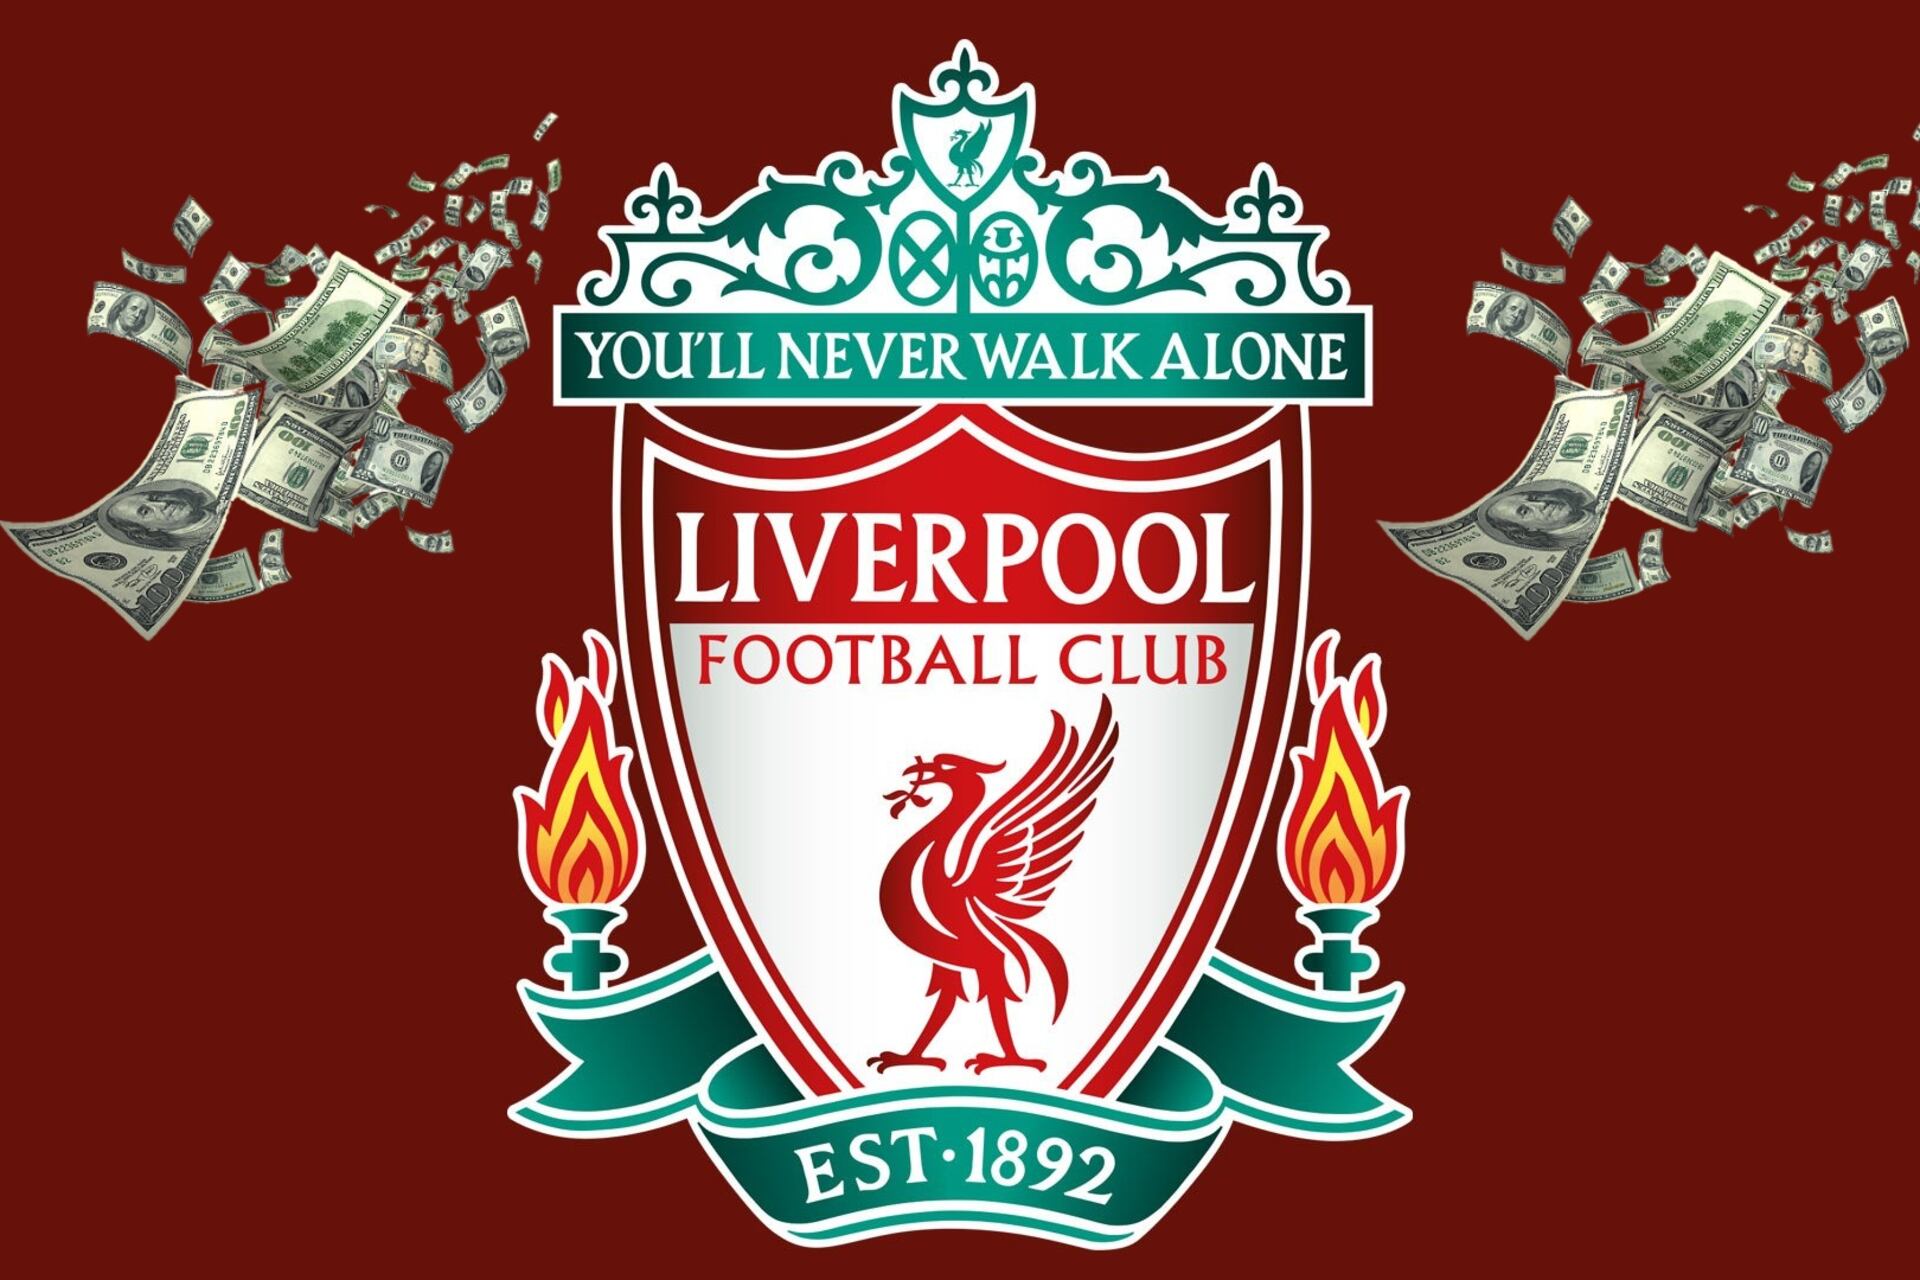 More than $150M, the new contract between Liverpool and Adidas and who they would sign with the earnings